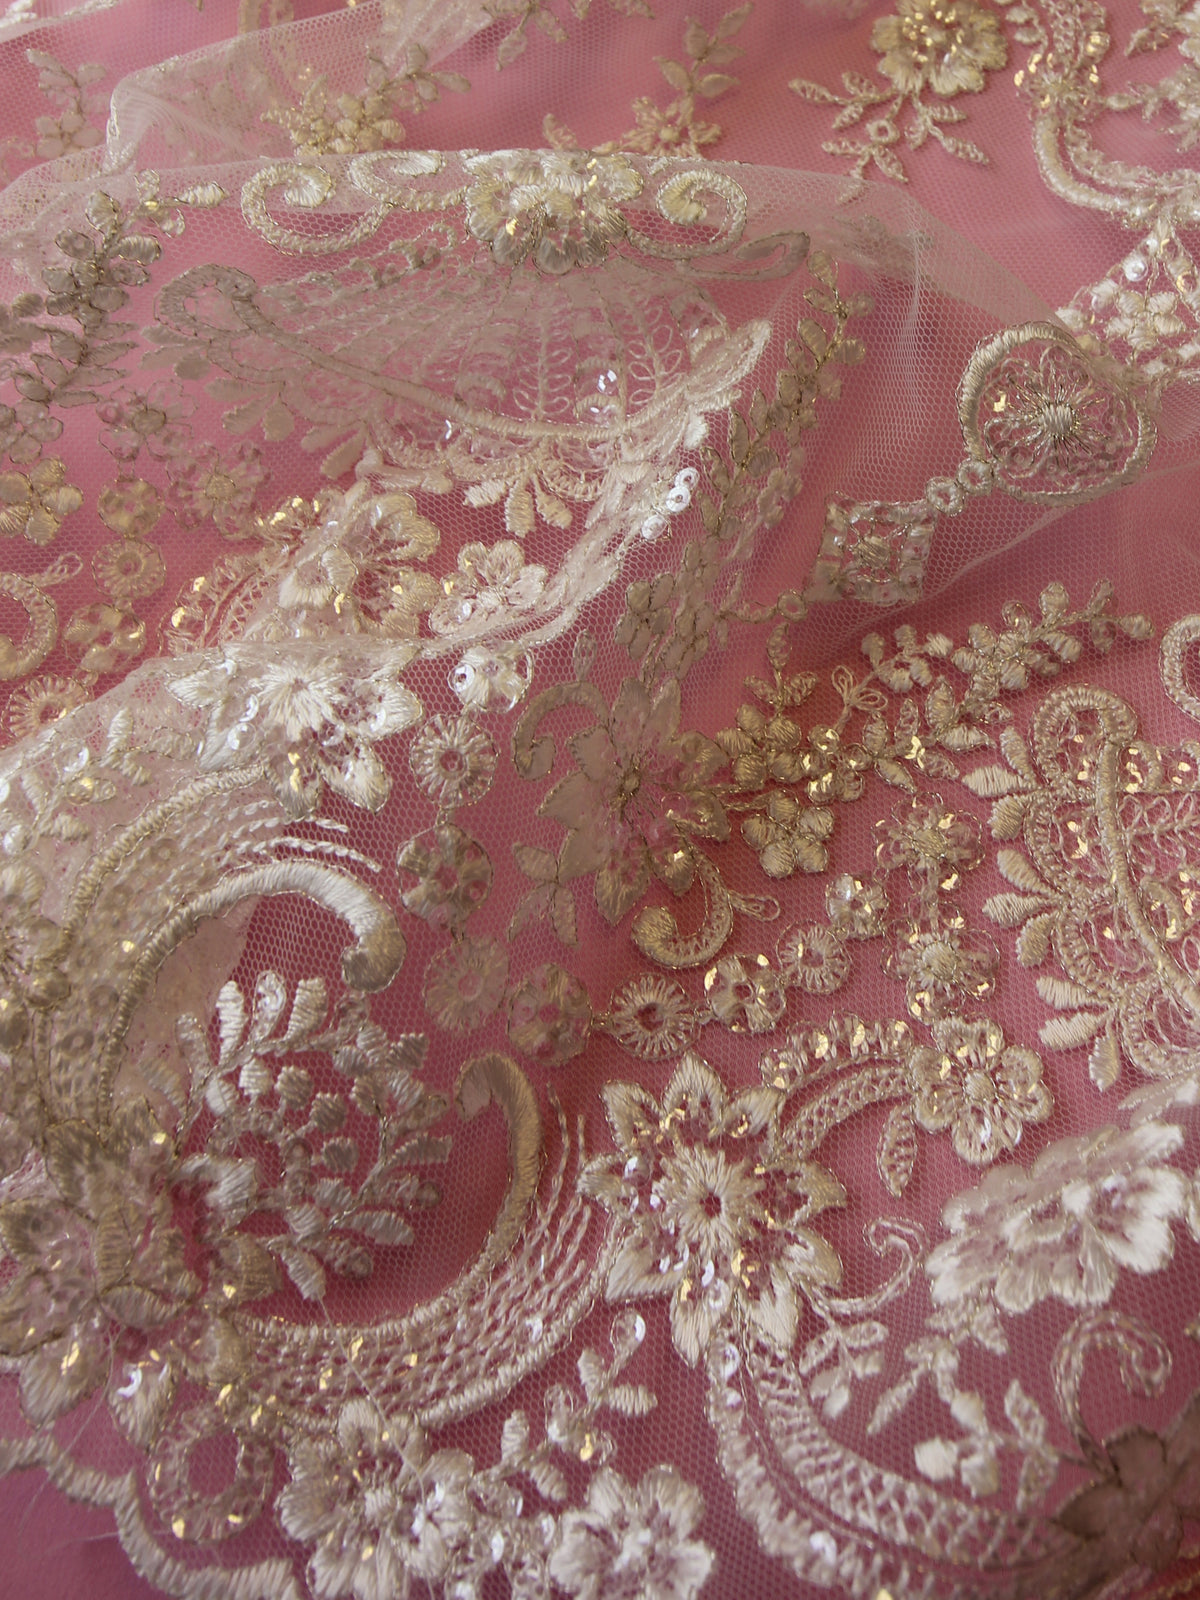 Ivory Embroidered Lace - Ruby